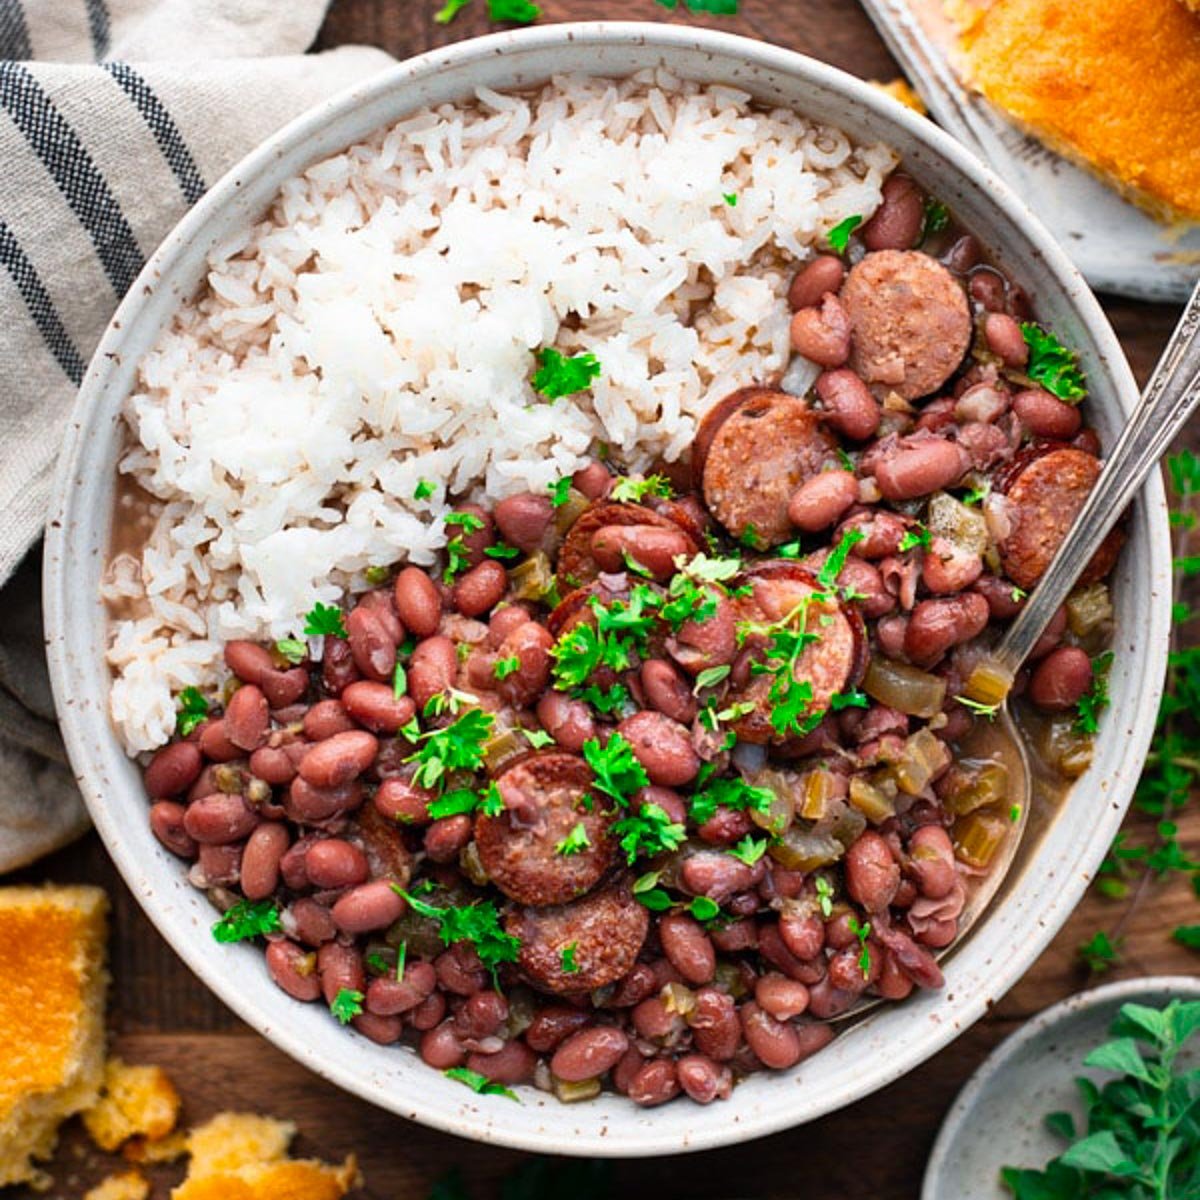 New Orleans Red Beans and Rice Recipe - The Seasoned Mom